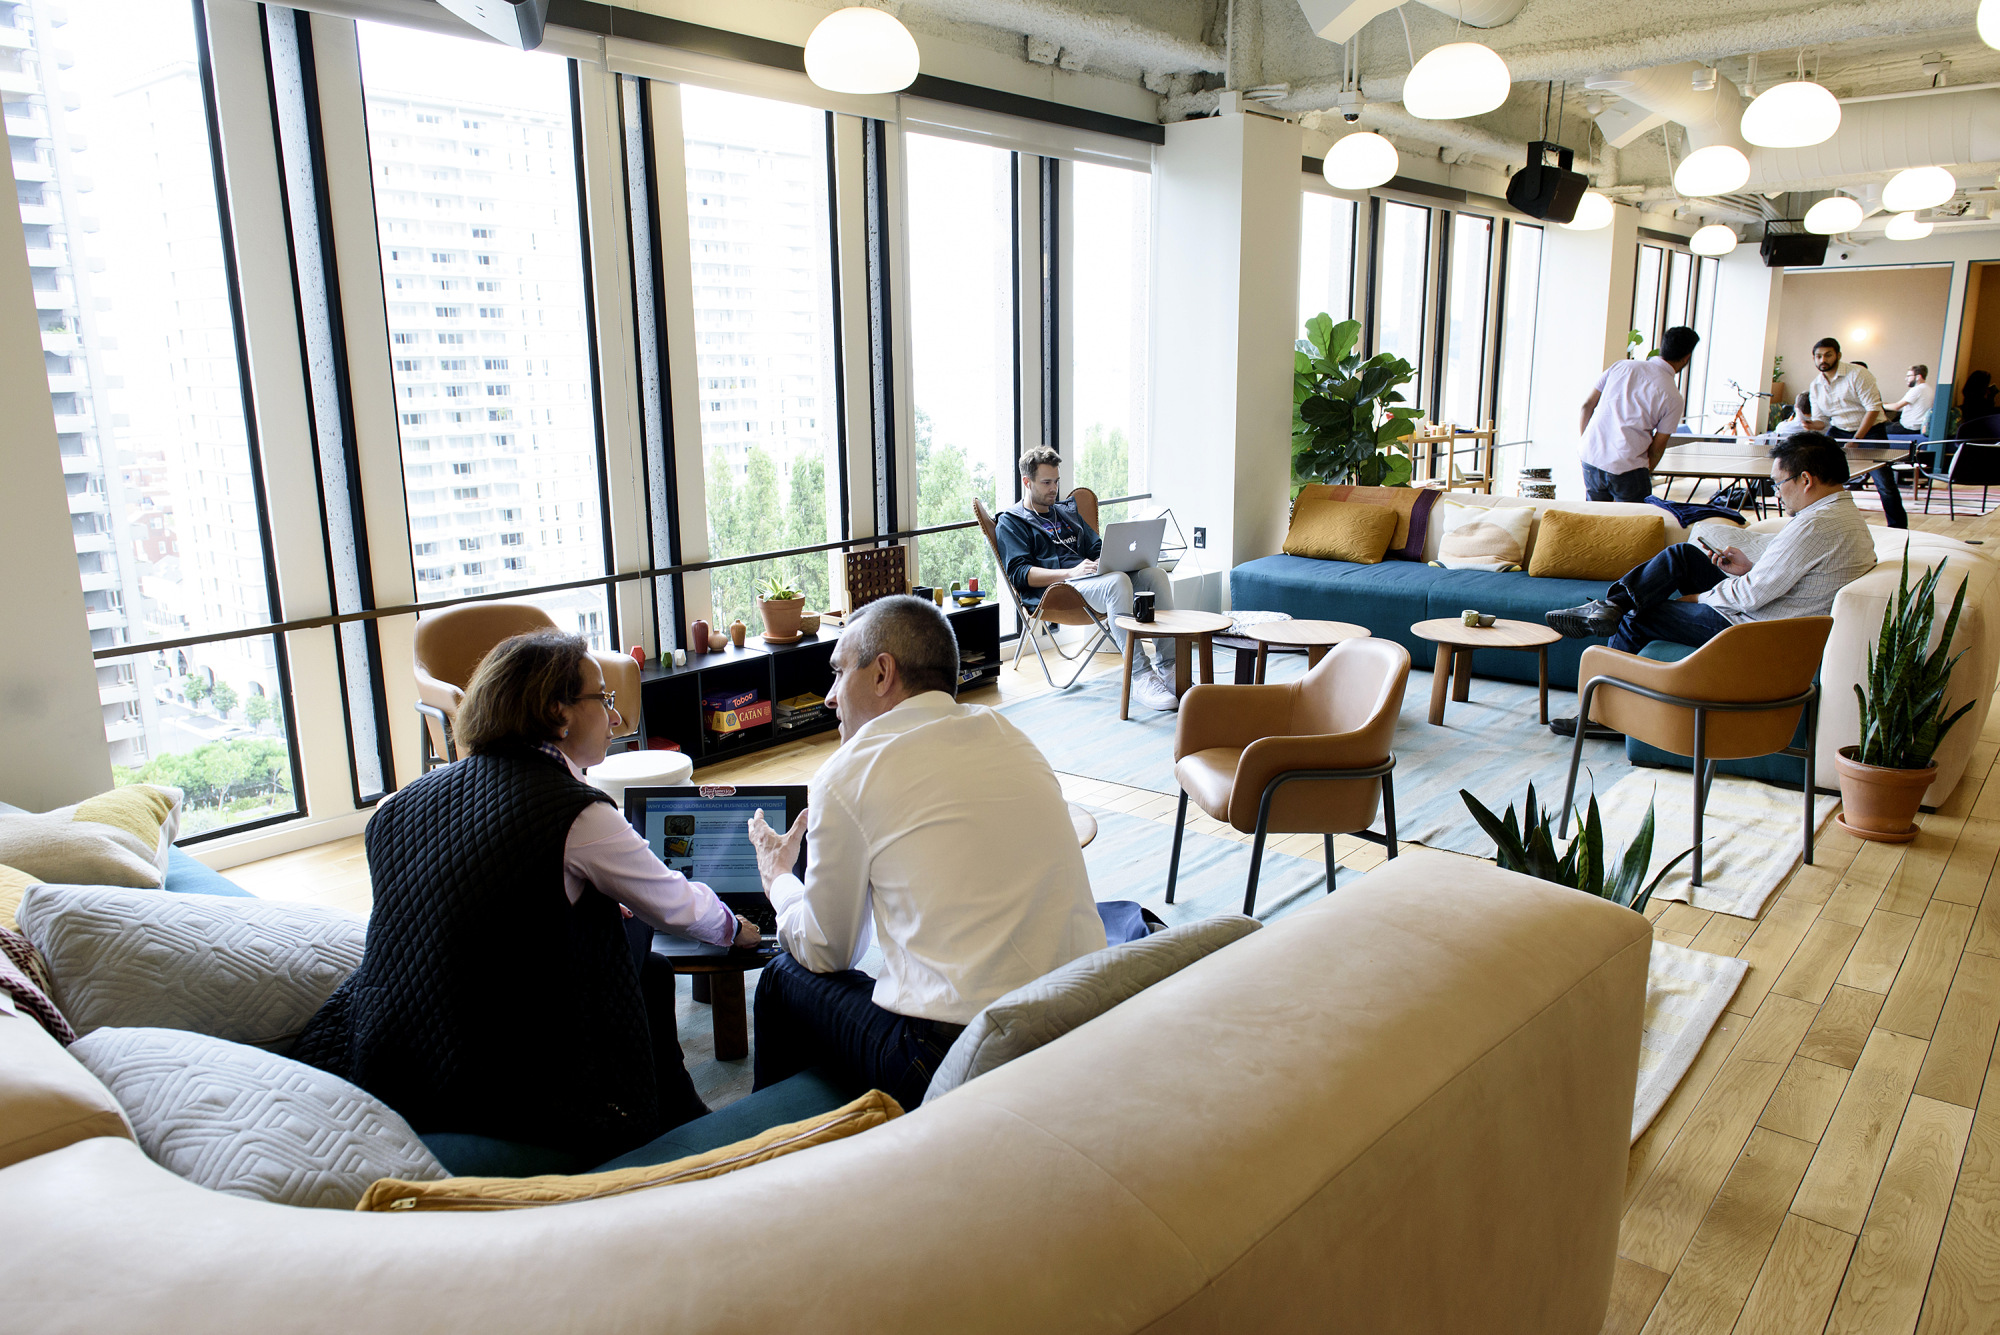 Members work on laptop computers in a common room at the Embarcadero WeWork Cos Inc. offices in San Francisco, California.